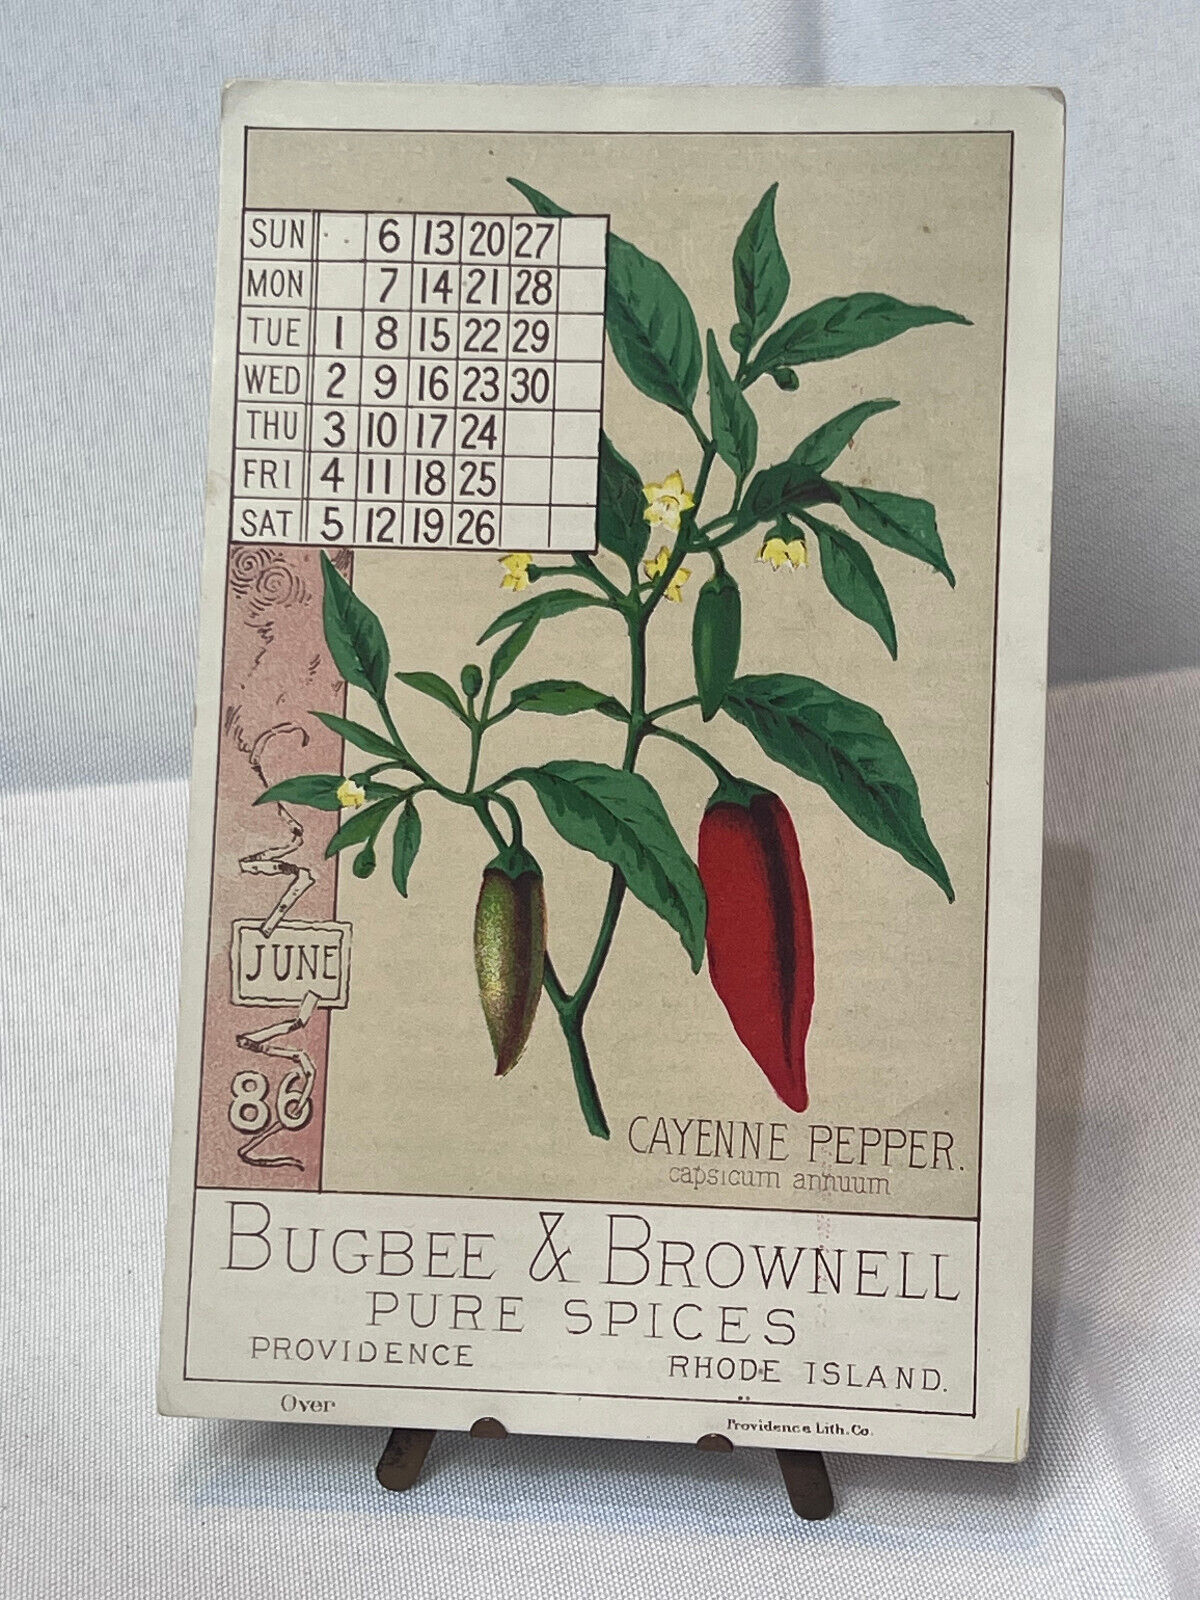 Atq Trade Card Bugbee & Brownell Pure Spices Cayenne Pepper June 1886 Calendar